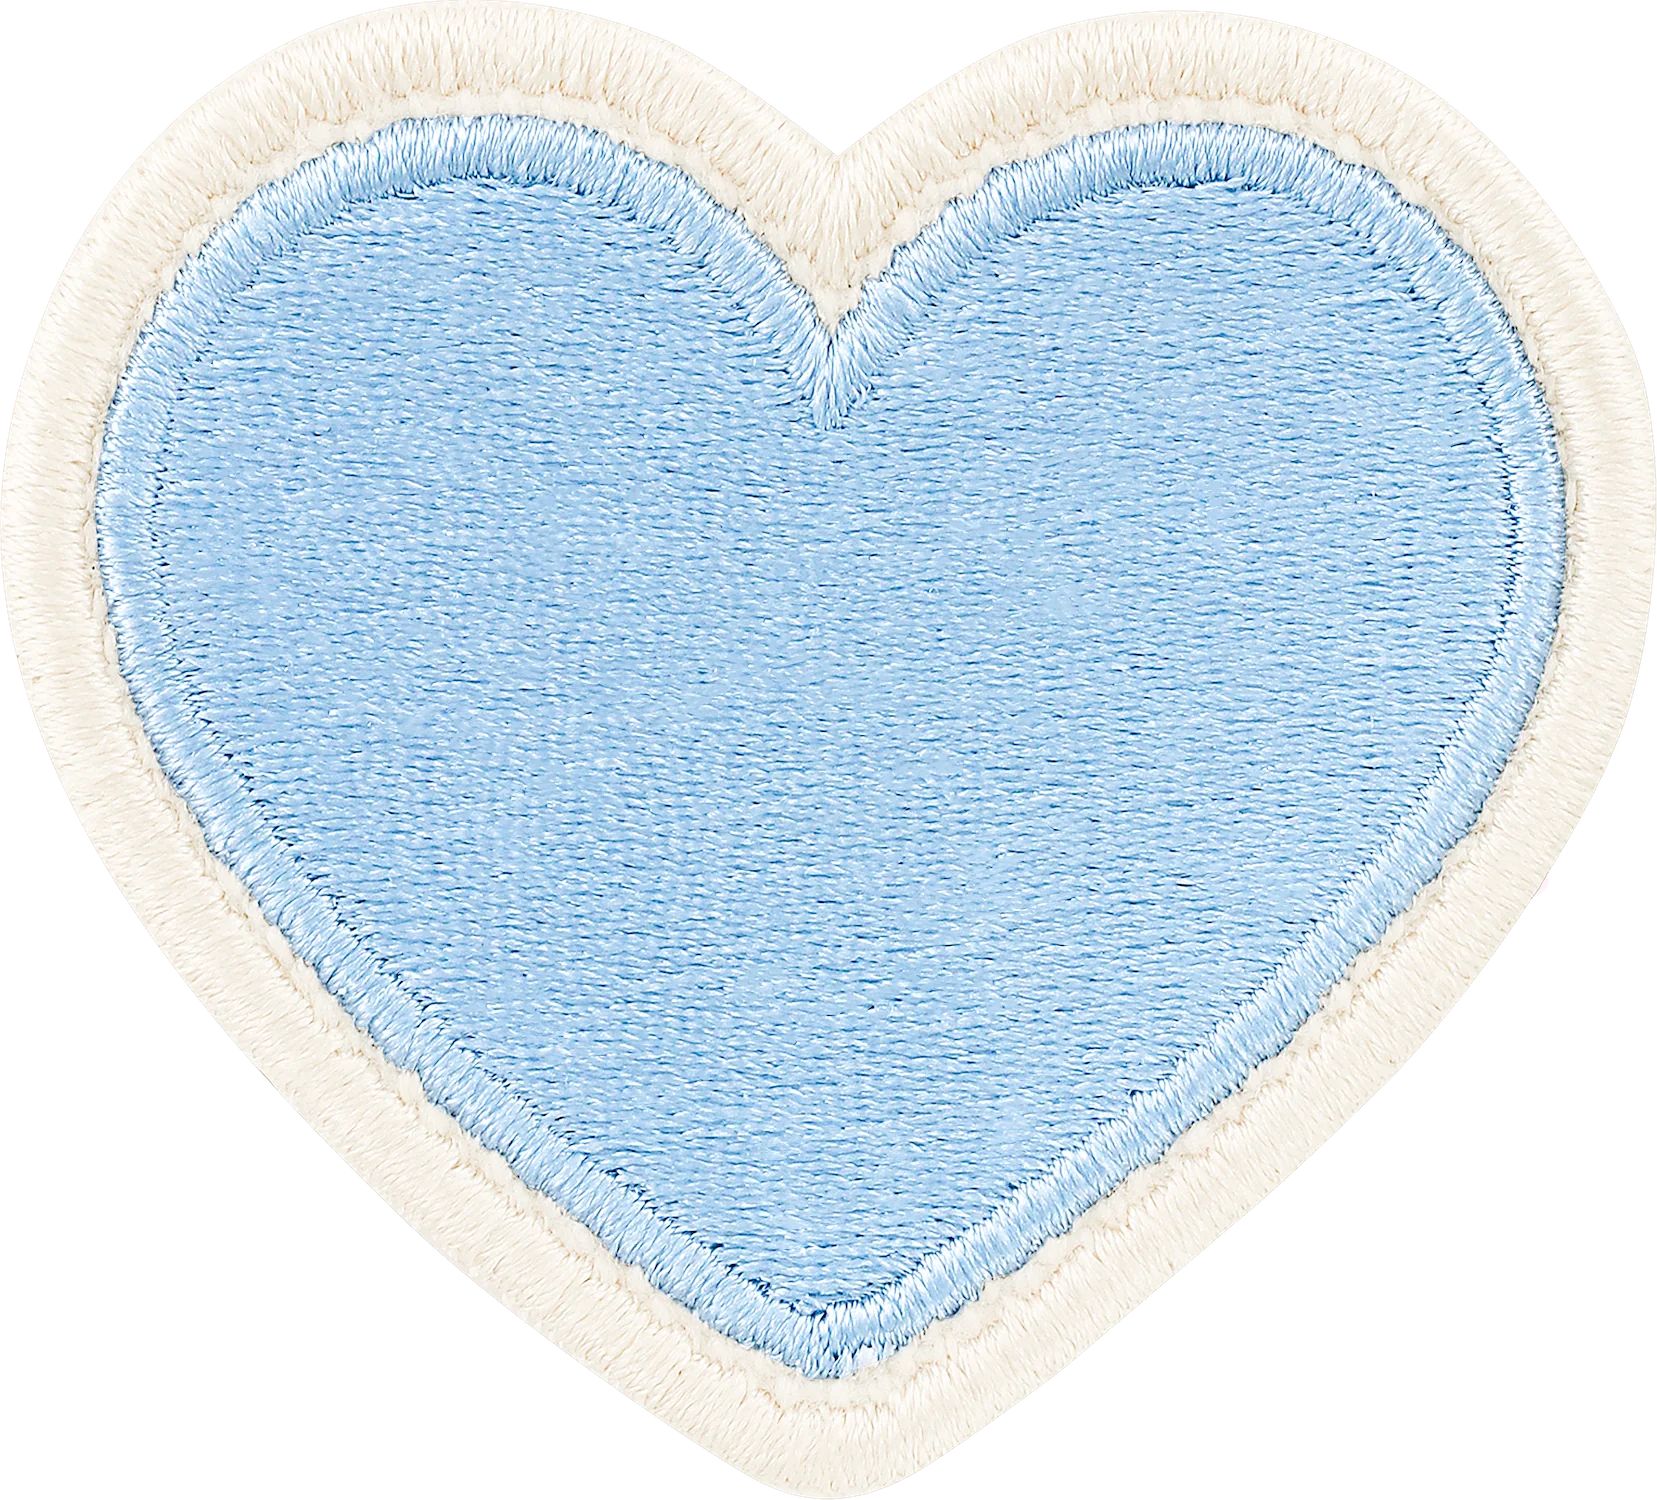 Periwinkle Rolled Embroidery Heart Sticker Patch | Stoney Clover Lane | Stoney Clover Lane